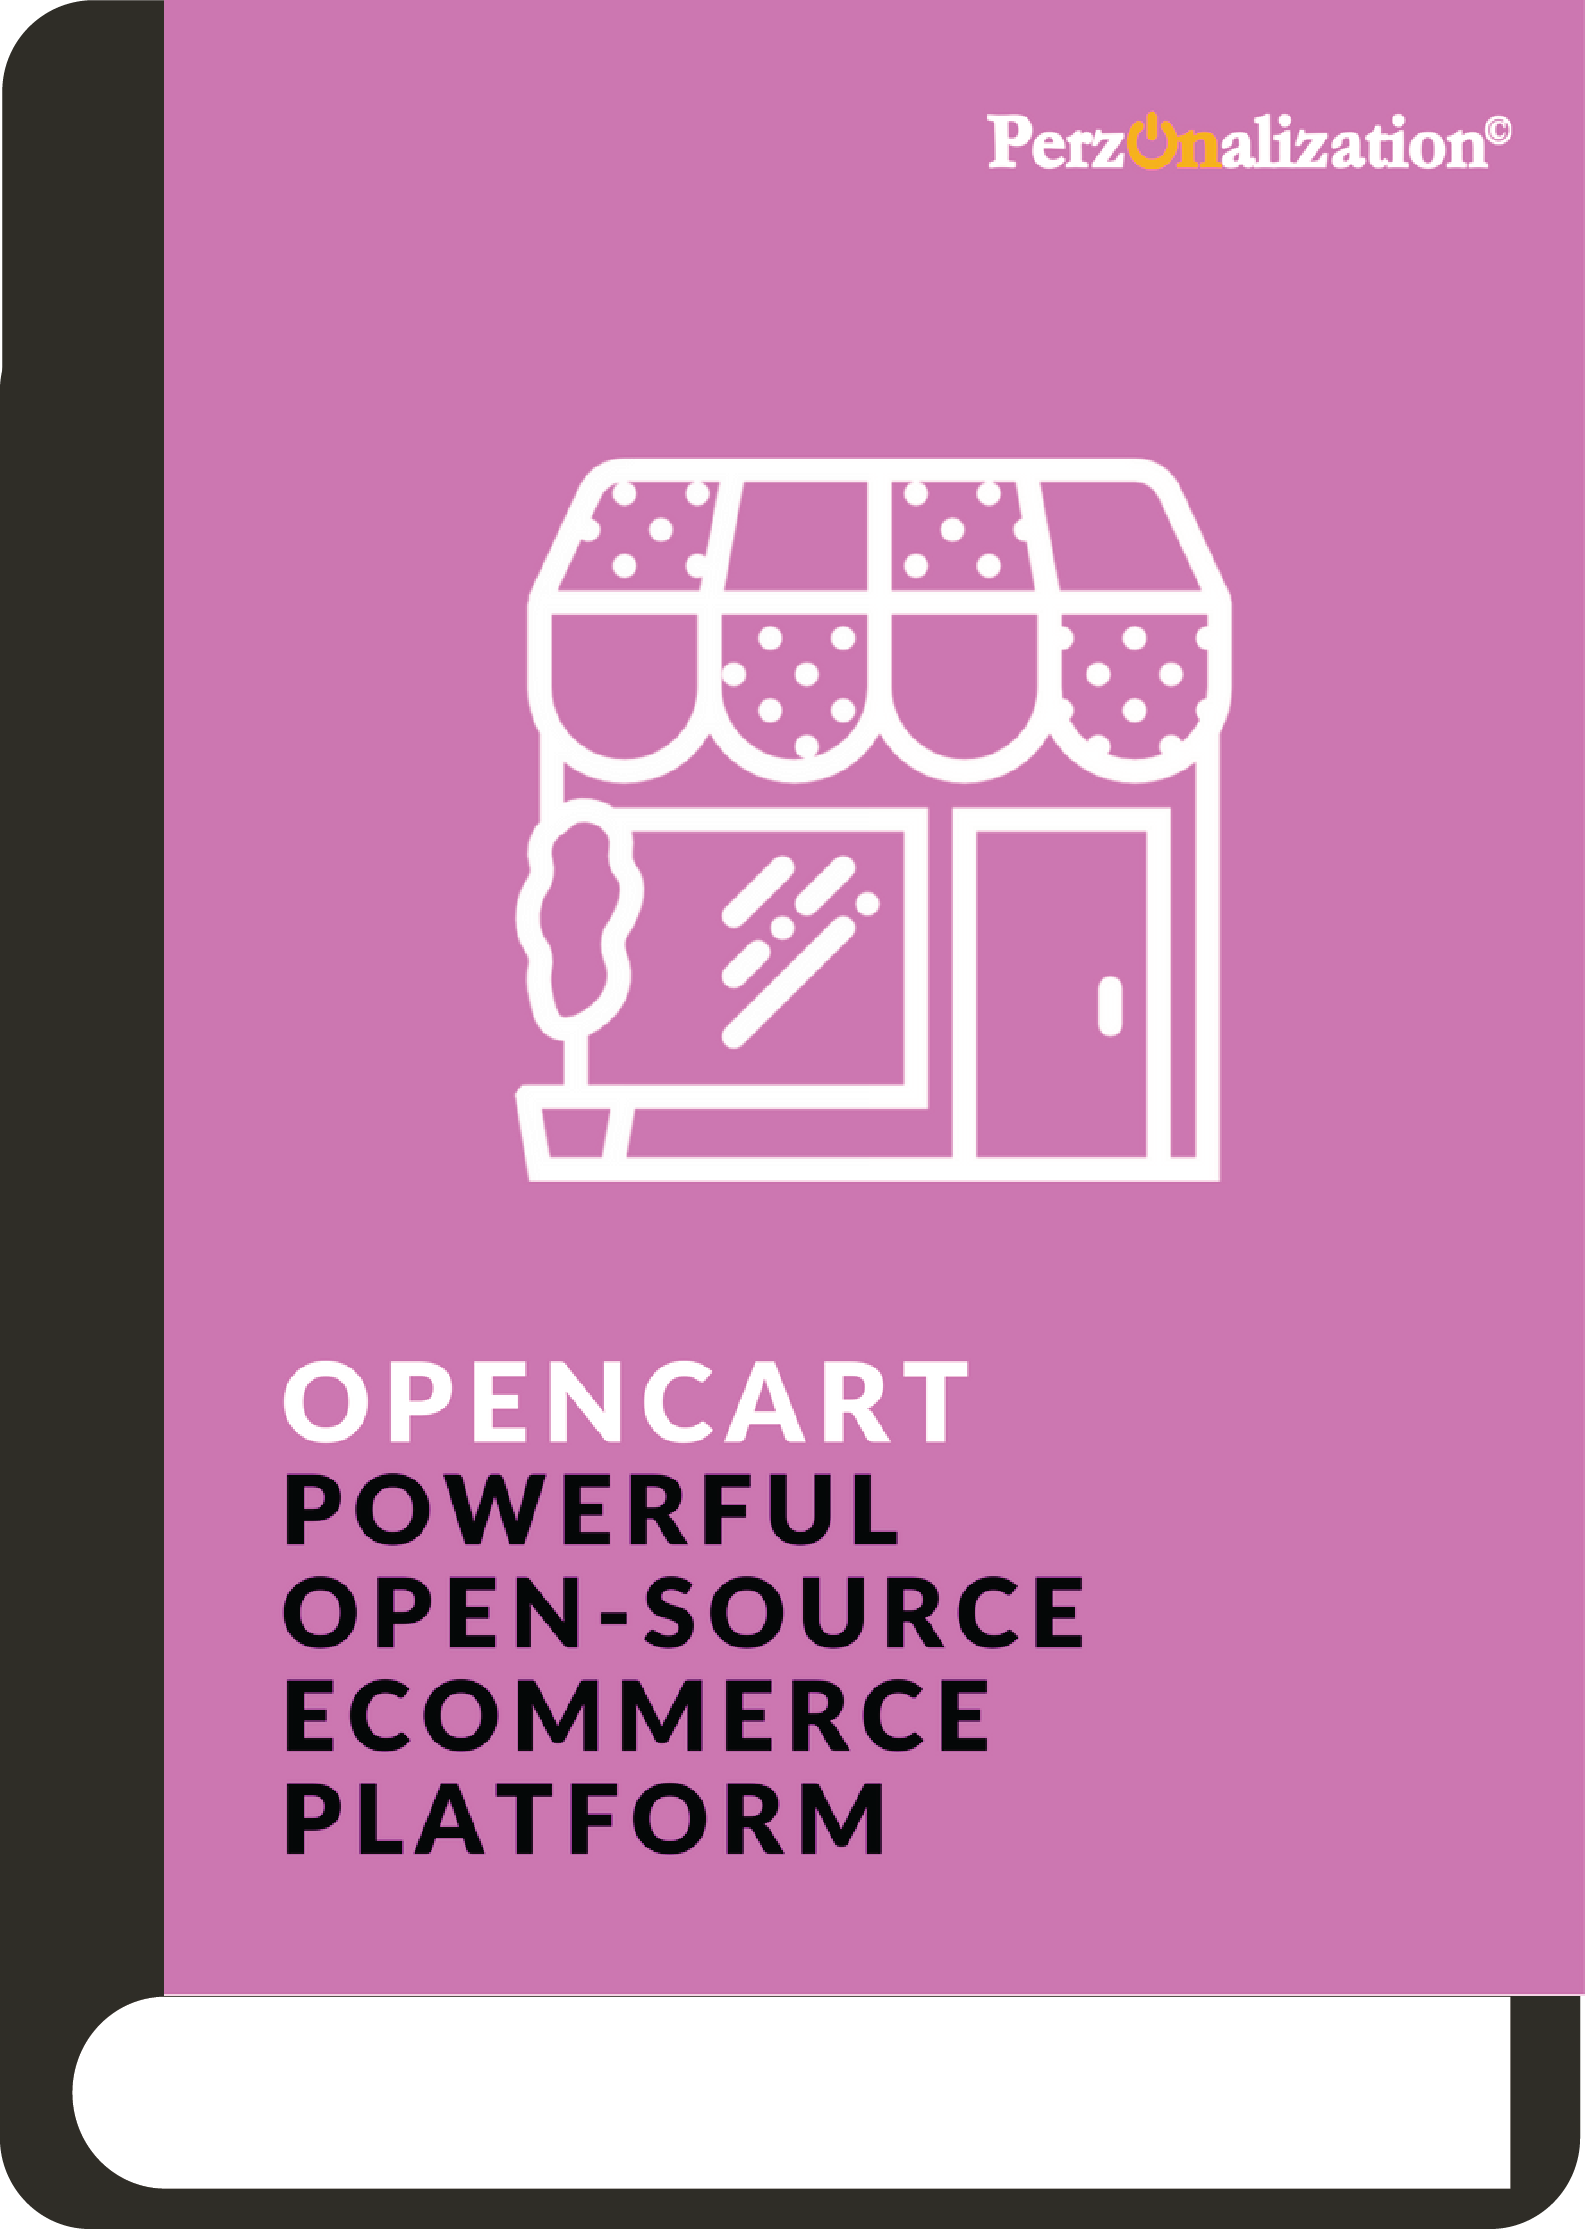 OpenCart is a user-friendly, affordable and formidable ecommerce software offering a wide range of modules ranging from logistics to personalization.